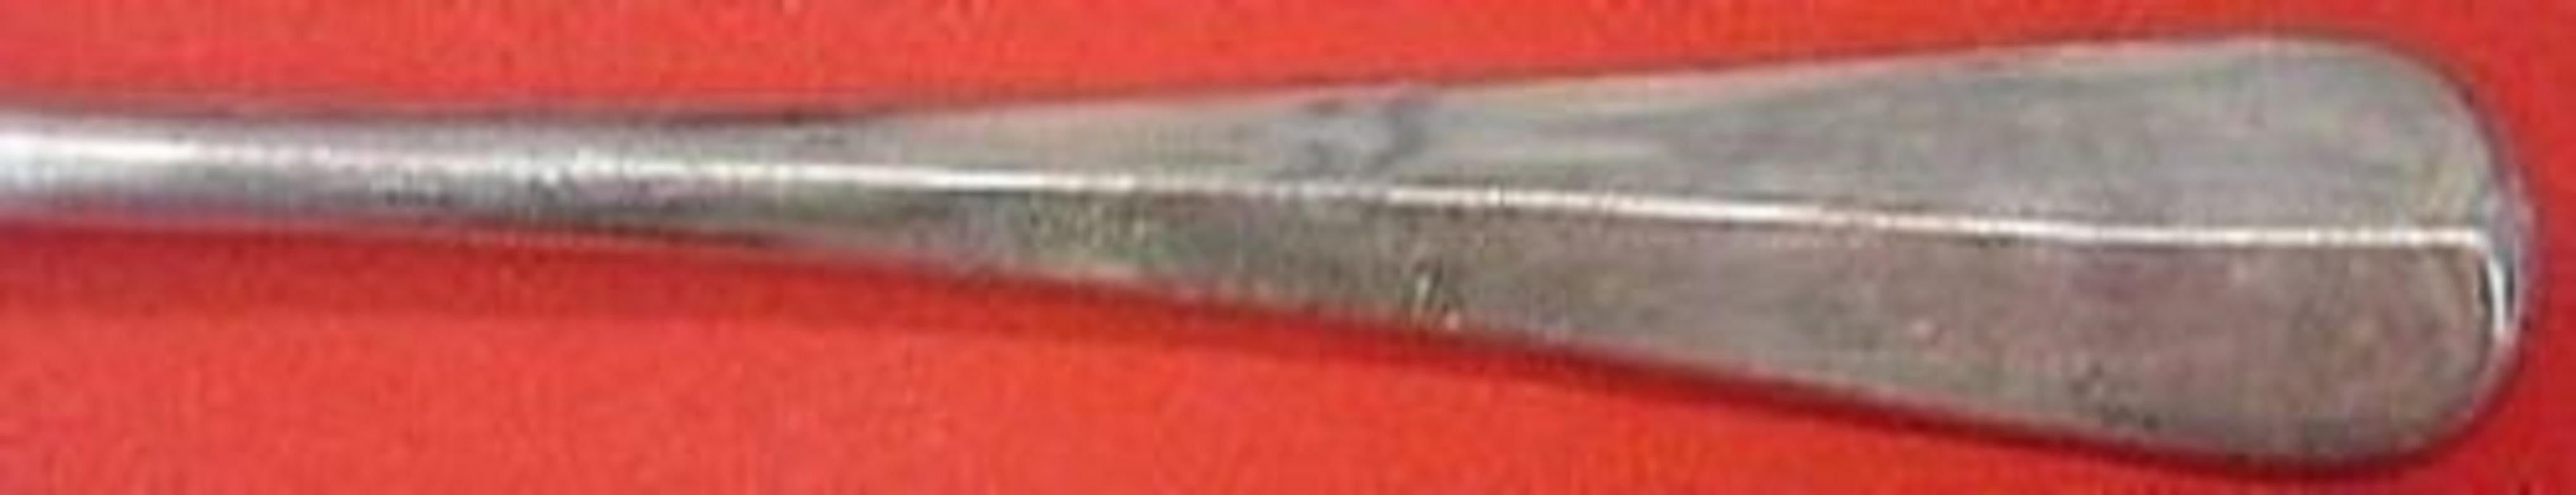 Sterling silver serving spoon, 8 1/2